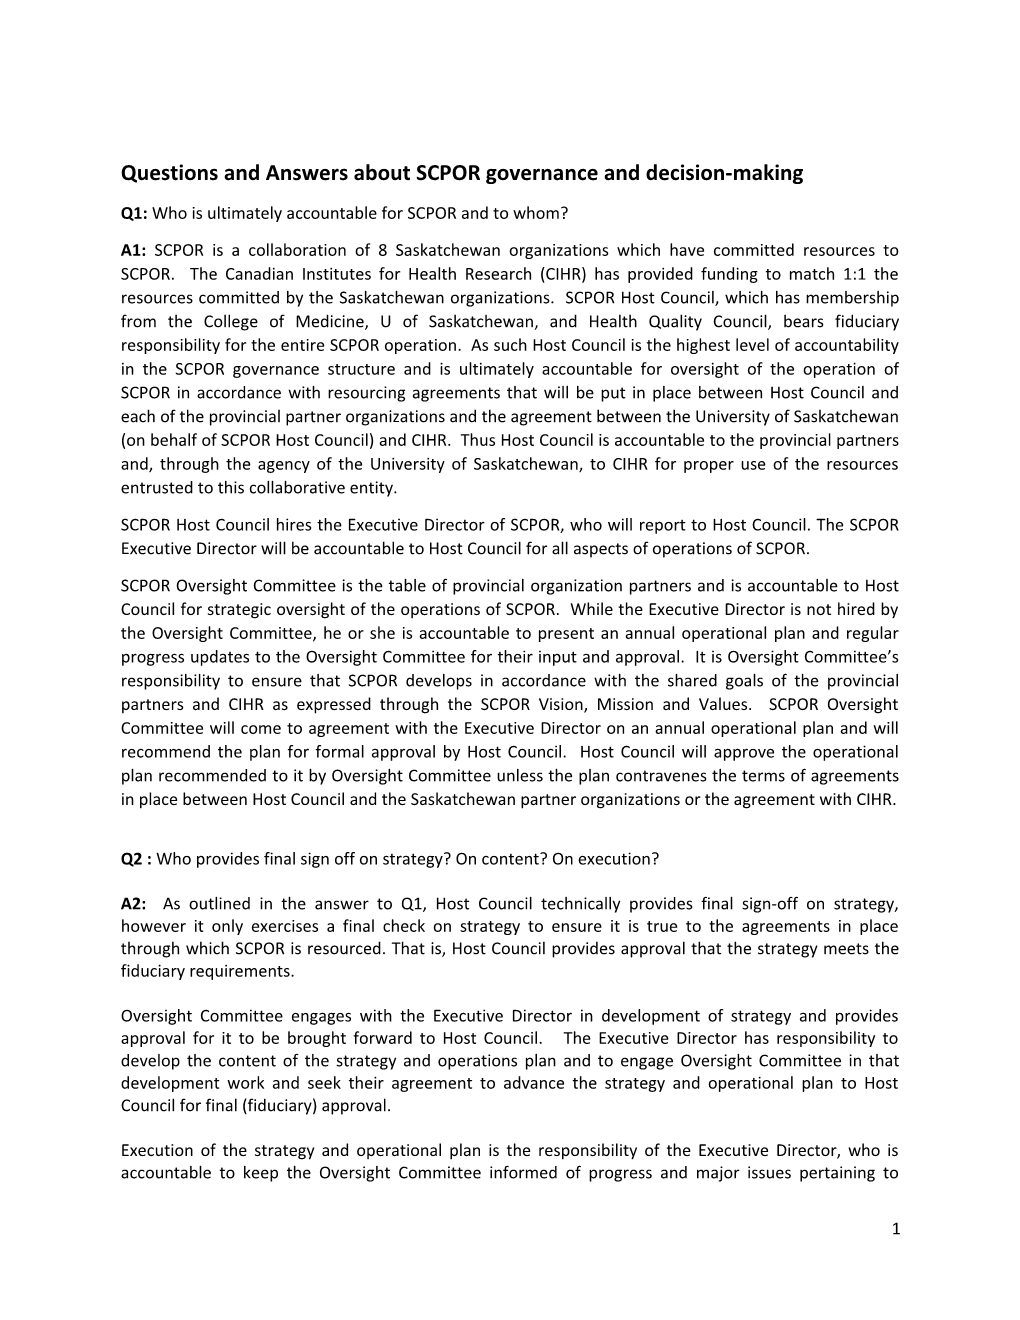 Questions and Answers About SCPOR Governance and Decision-Making